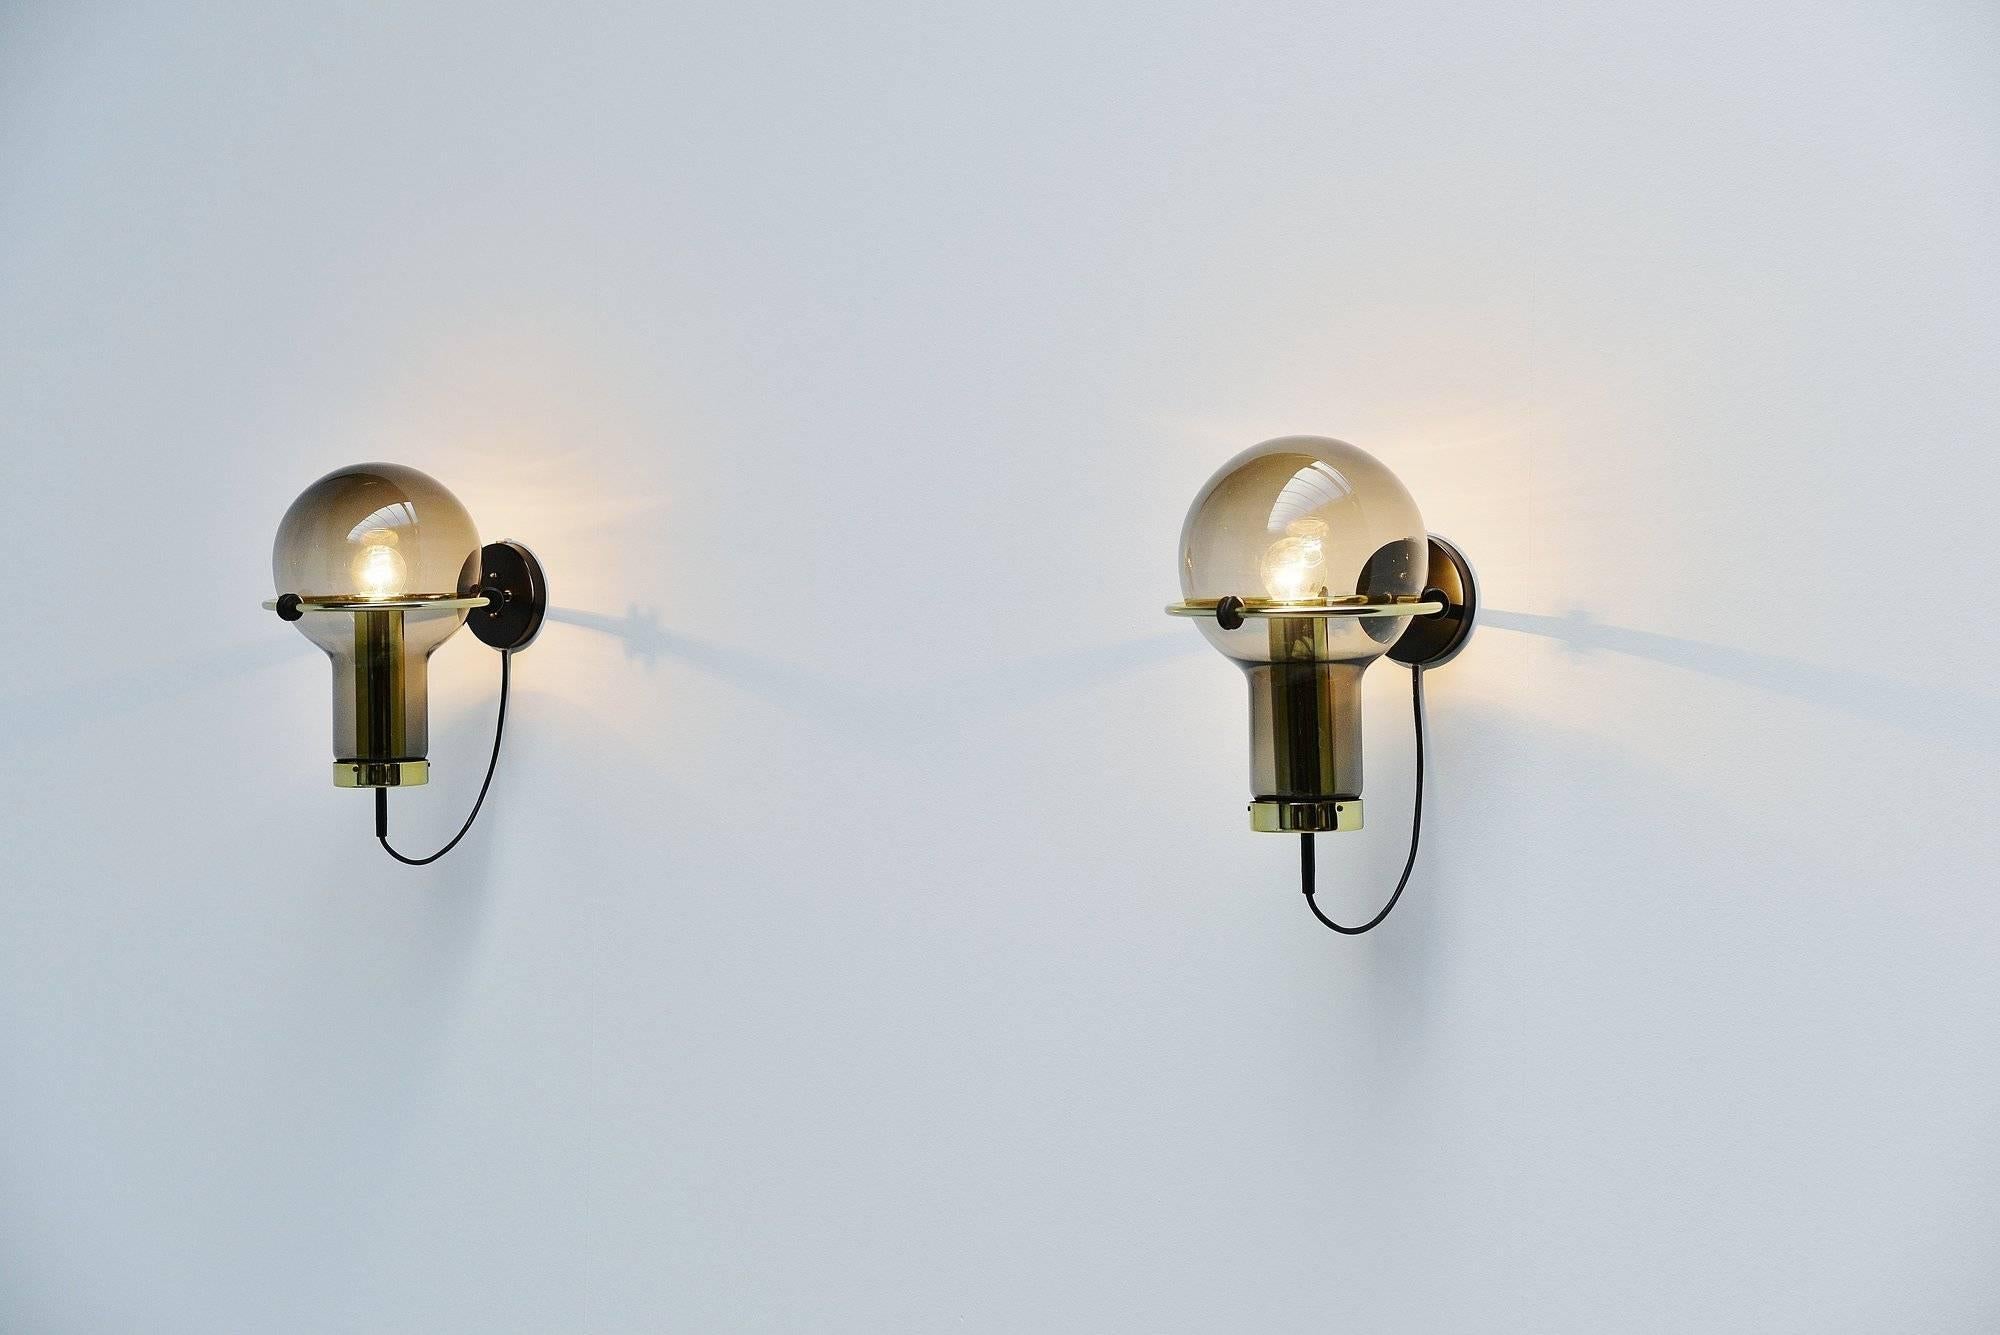 Very nice set of seven maxi globe wall lamps designed and made by RAAK Amsterdam, Holland, 1965. These lamps are called maxi globes and this is the smallest version available but still large for a wall lamp. The lamps have browngrey fume glass and a